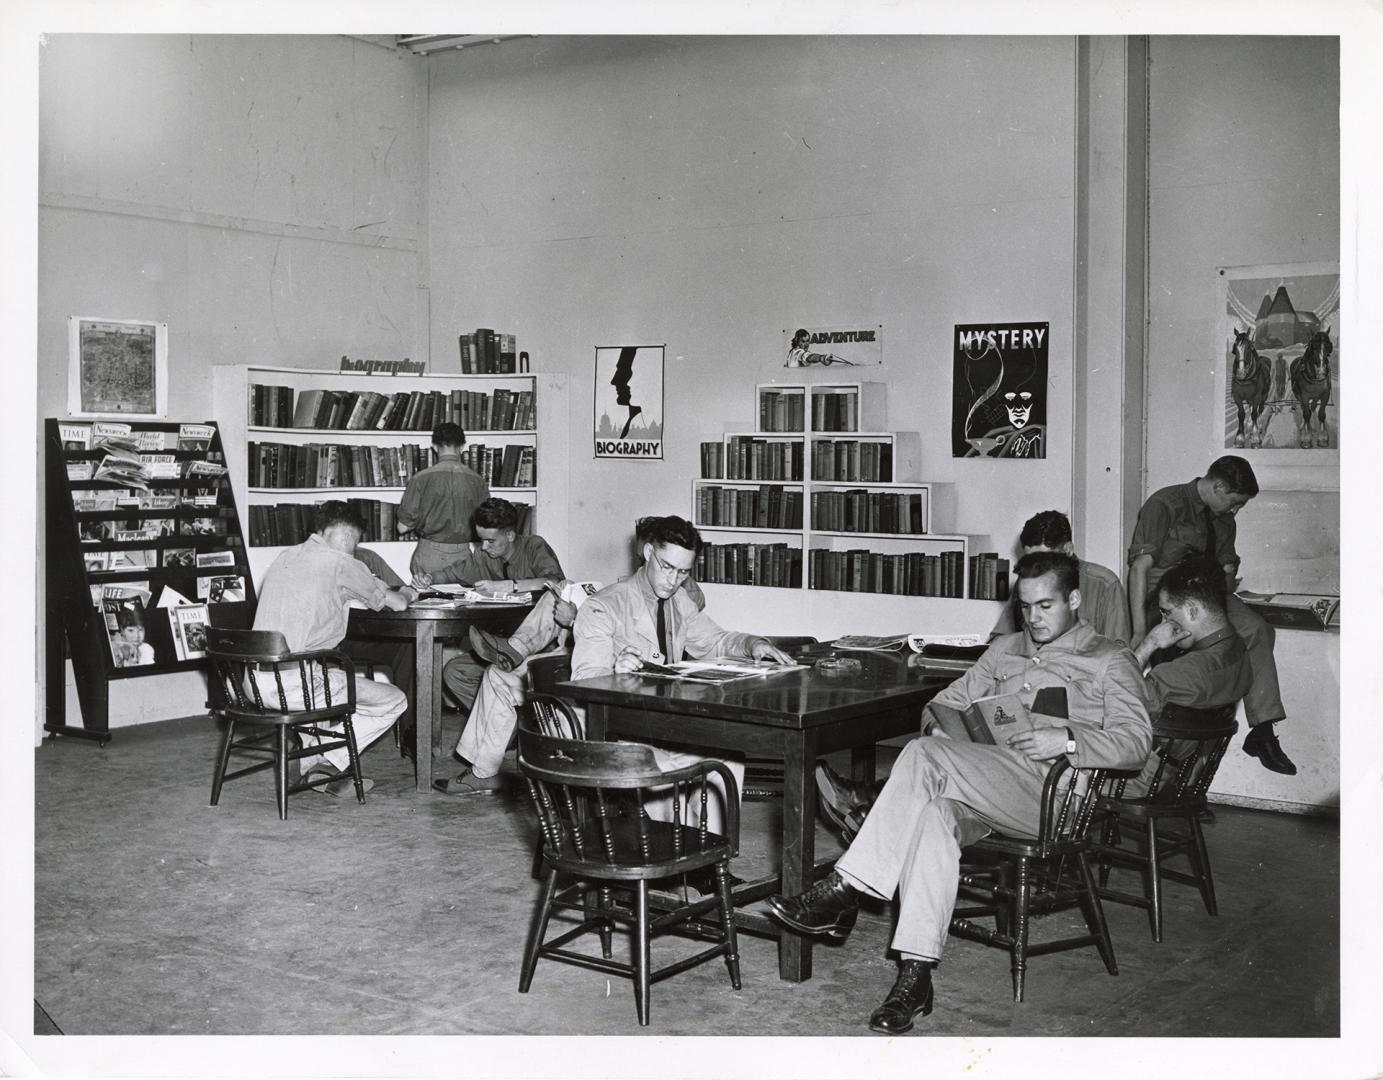 Photo of men reading at tables in a library. 